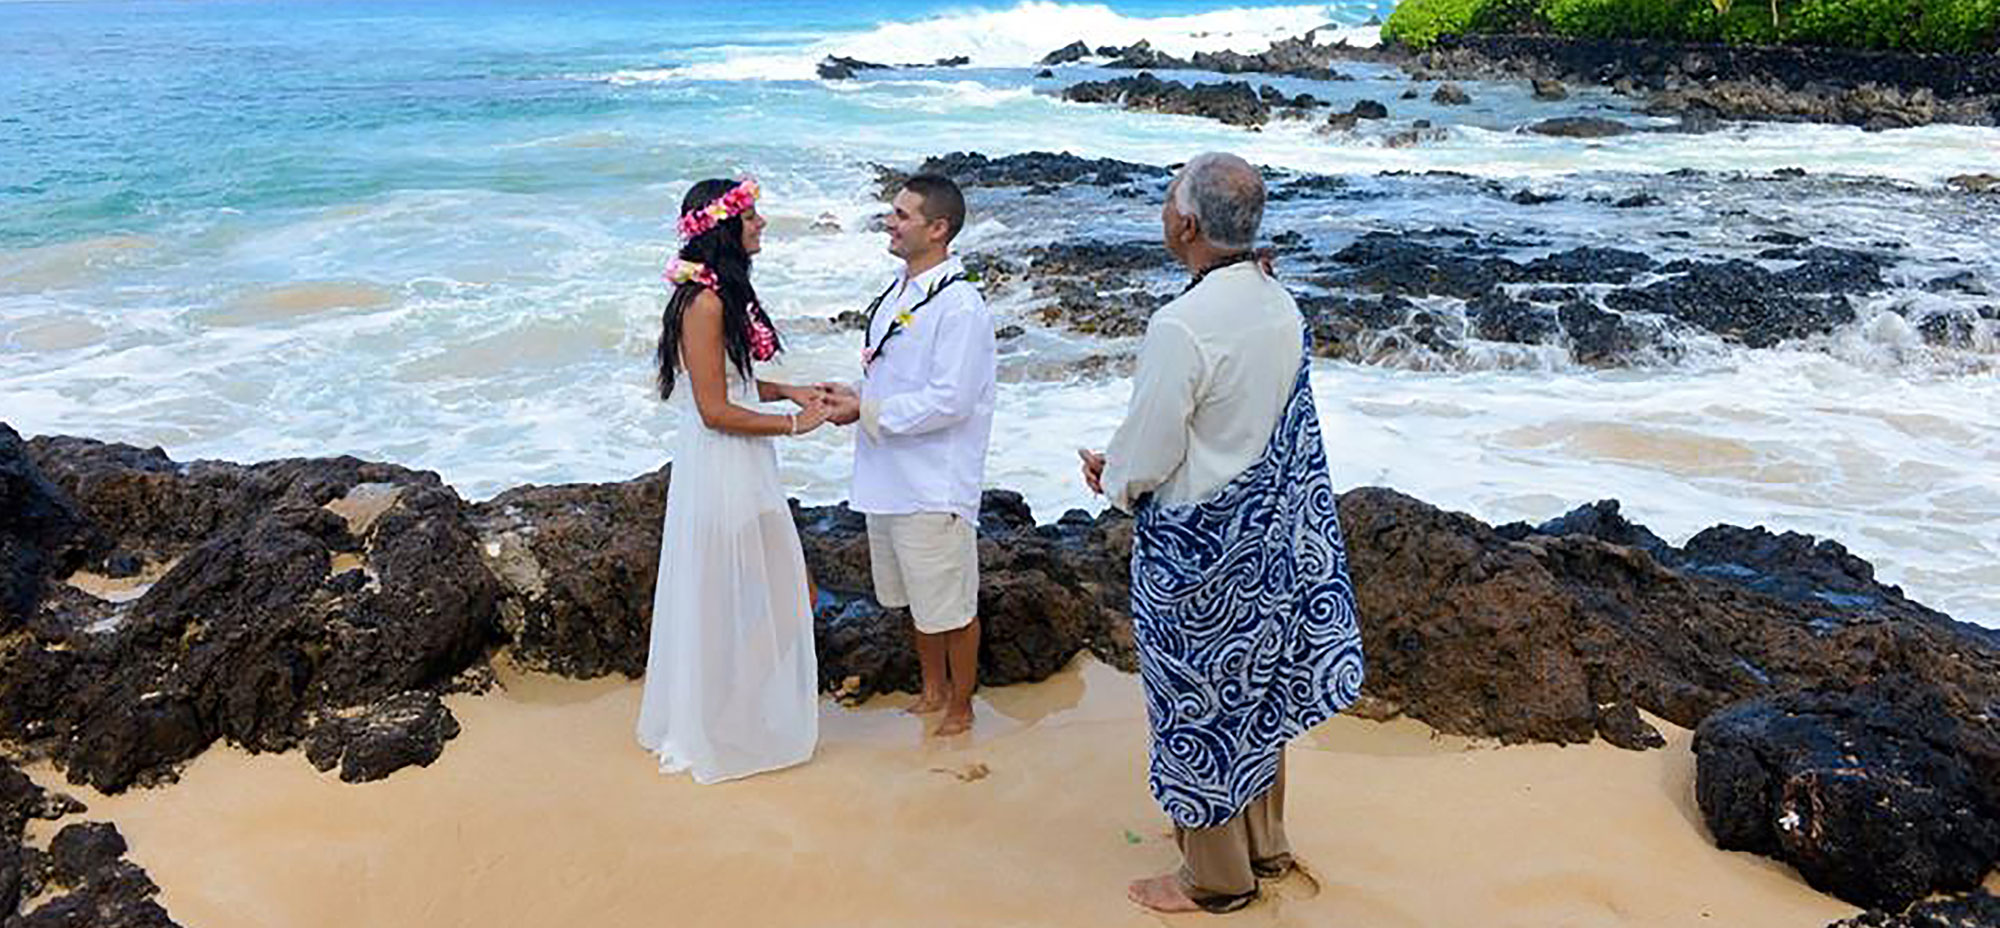 Maui's Wedding from the Heart